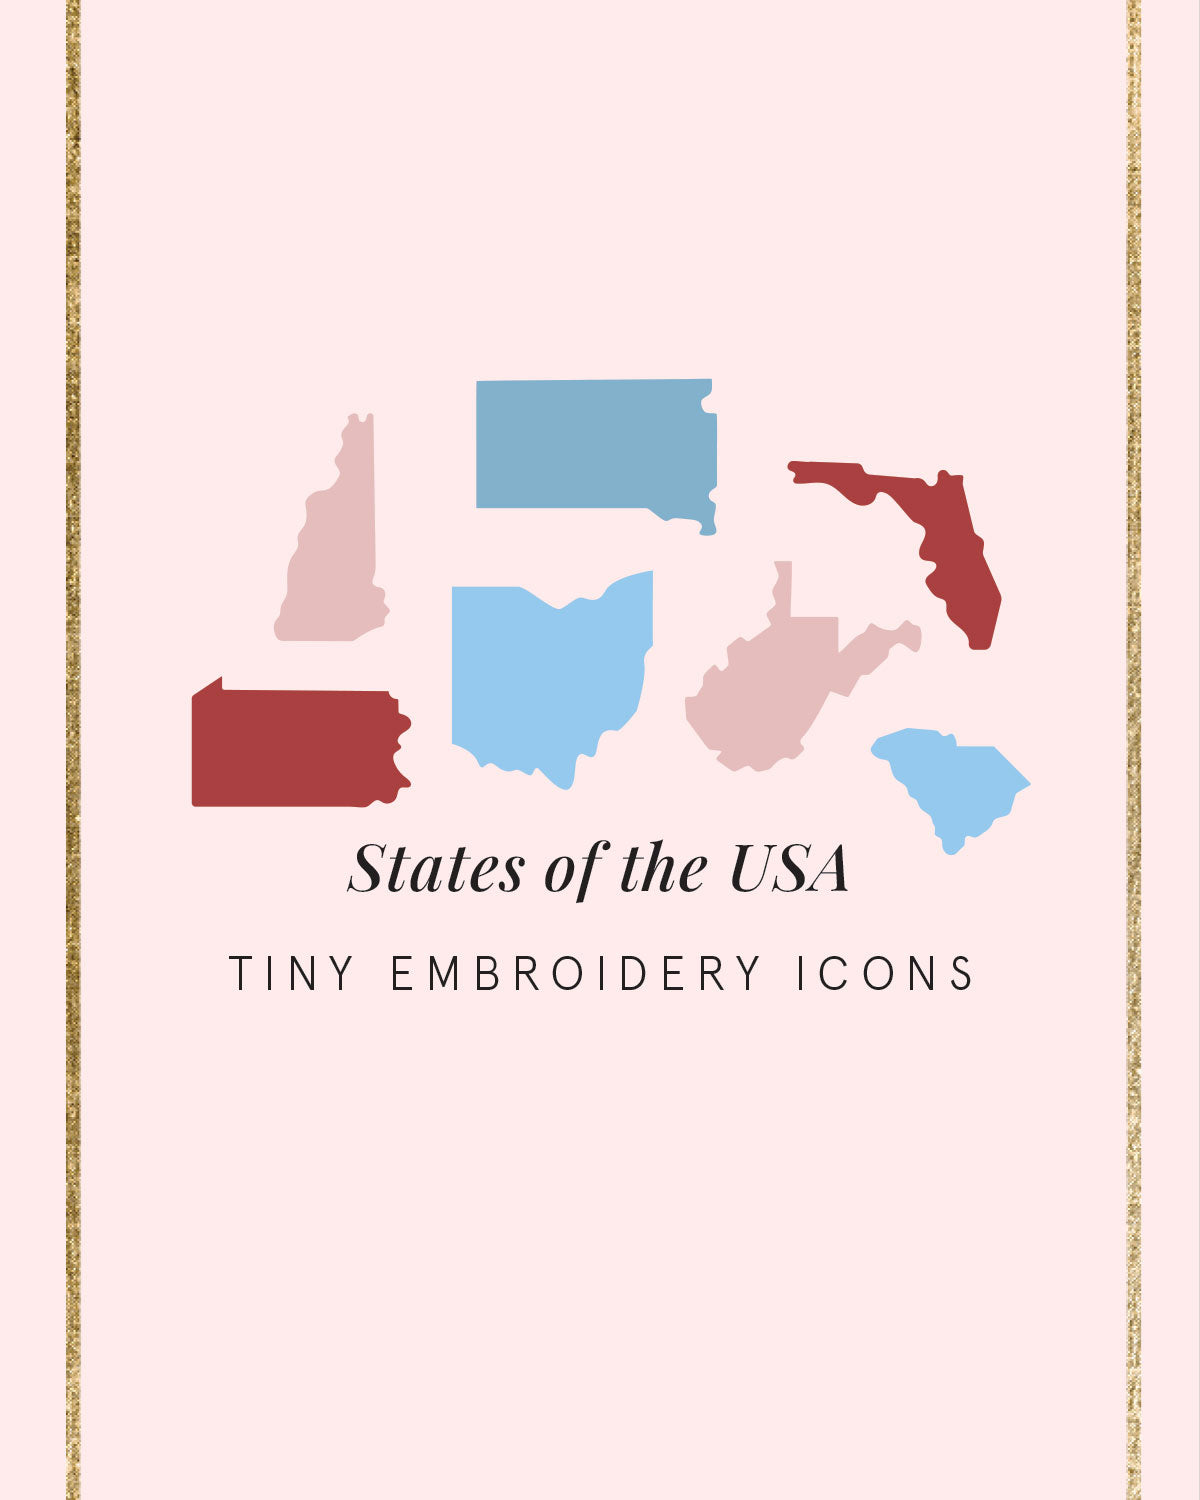 Embroidery Journal - Add On Icons, States of the USA – Emily June